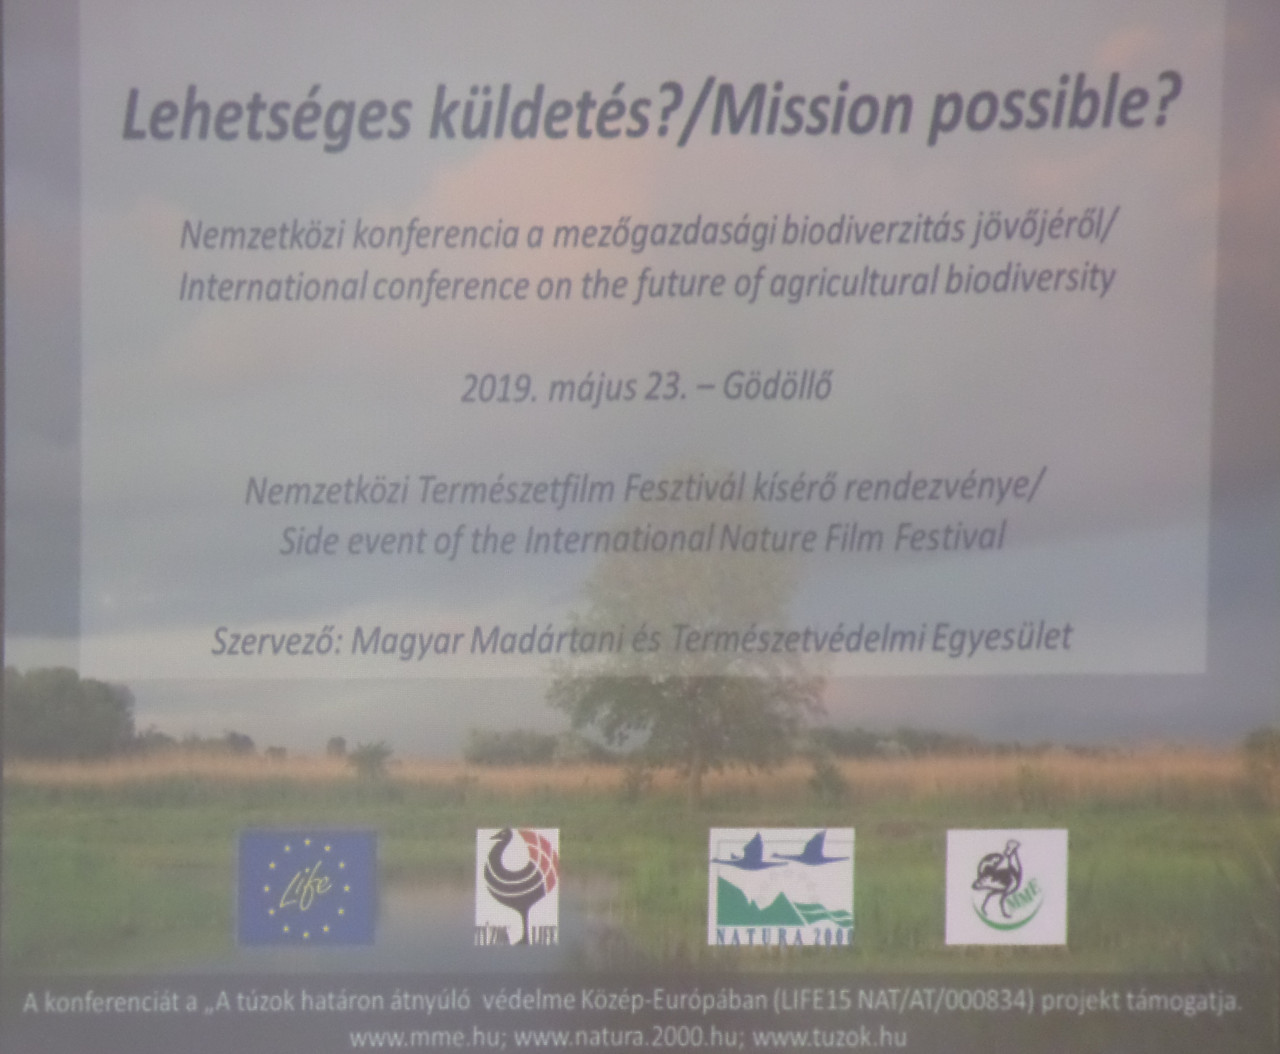 Mission possible? International Conference on Agricultural Biodiversity